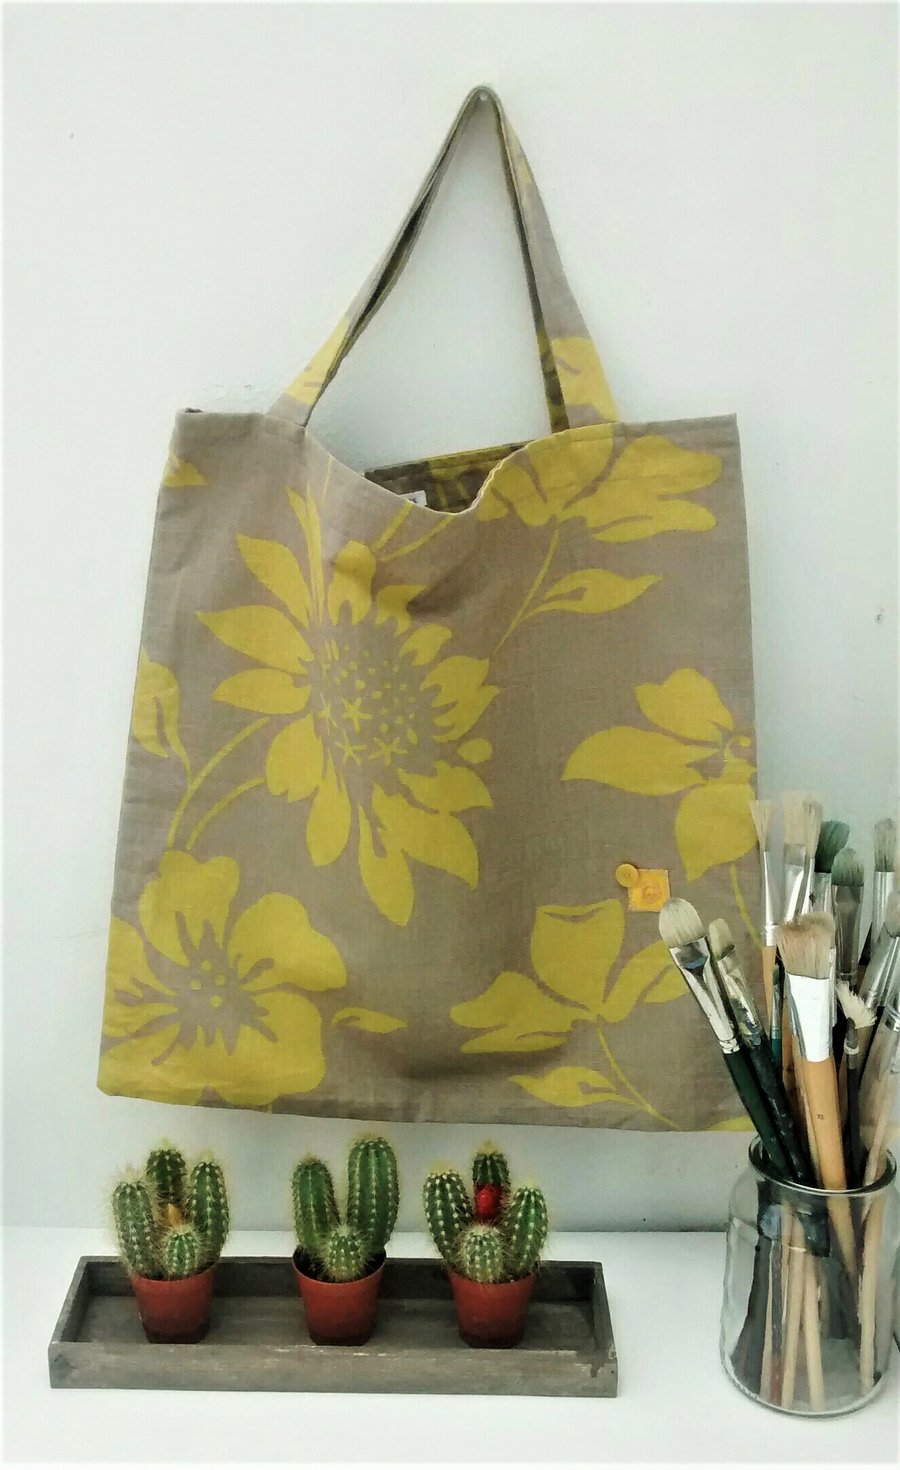 Tote Bag in Mustard Floral Fabric